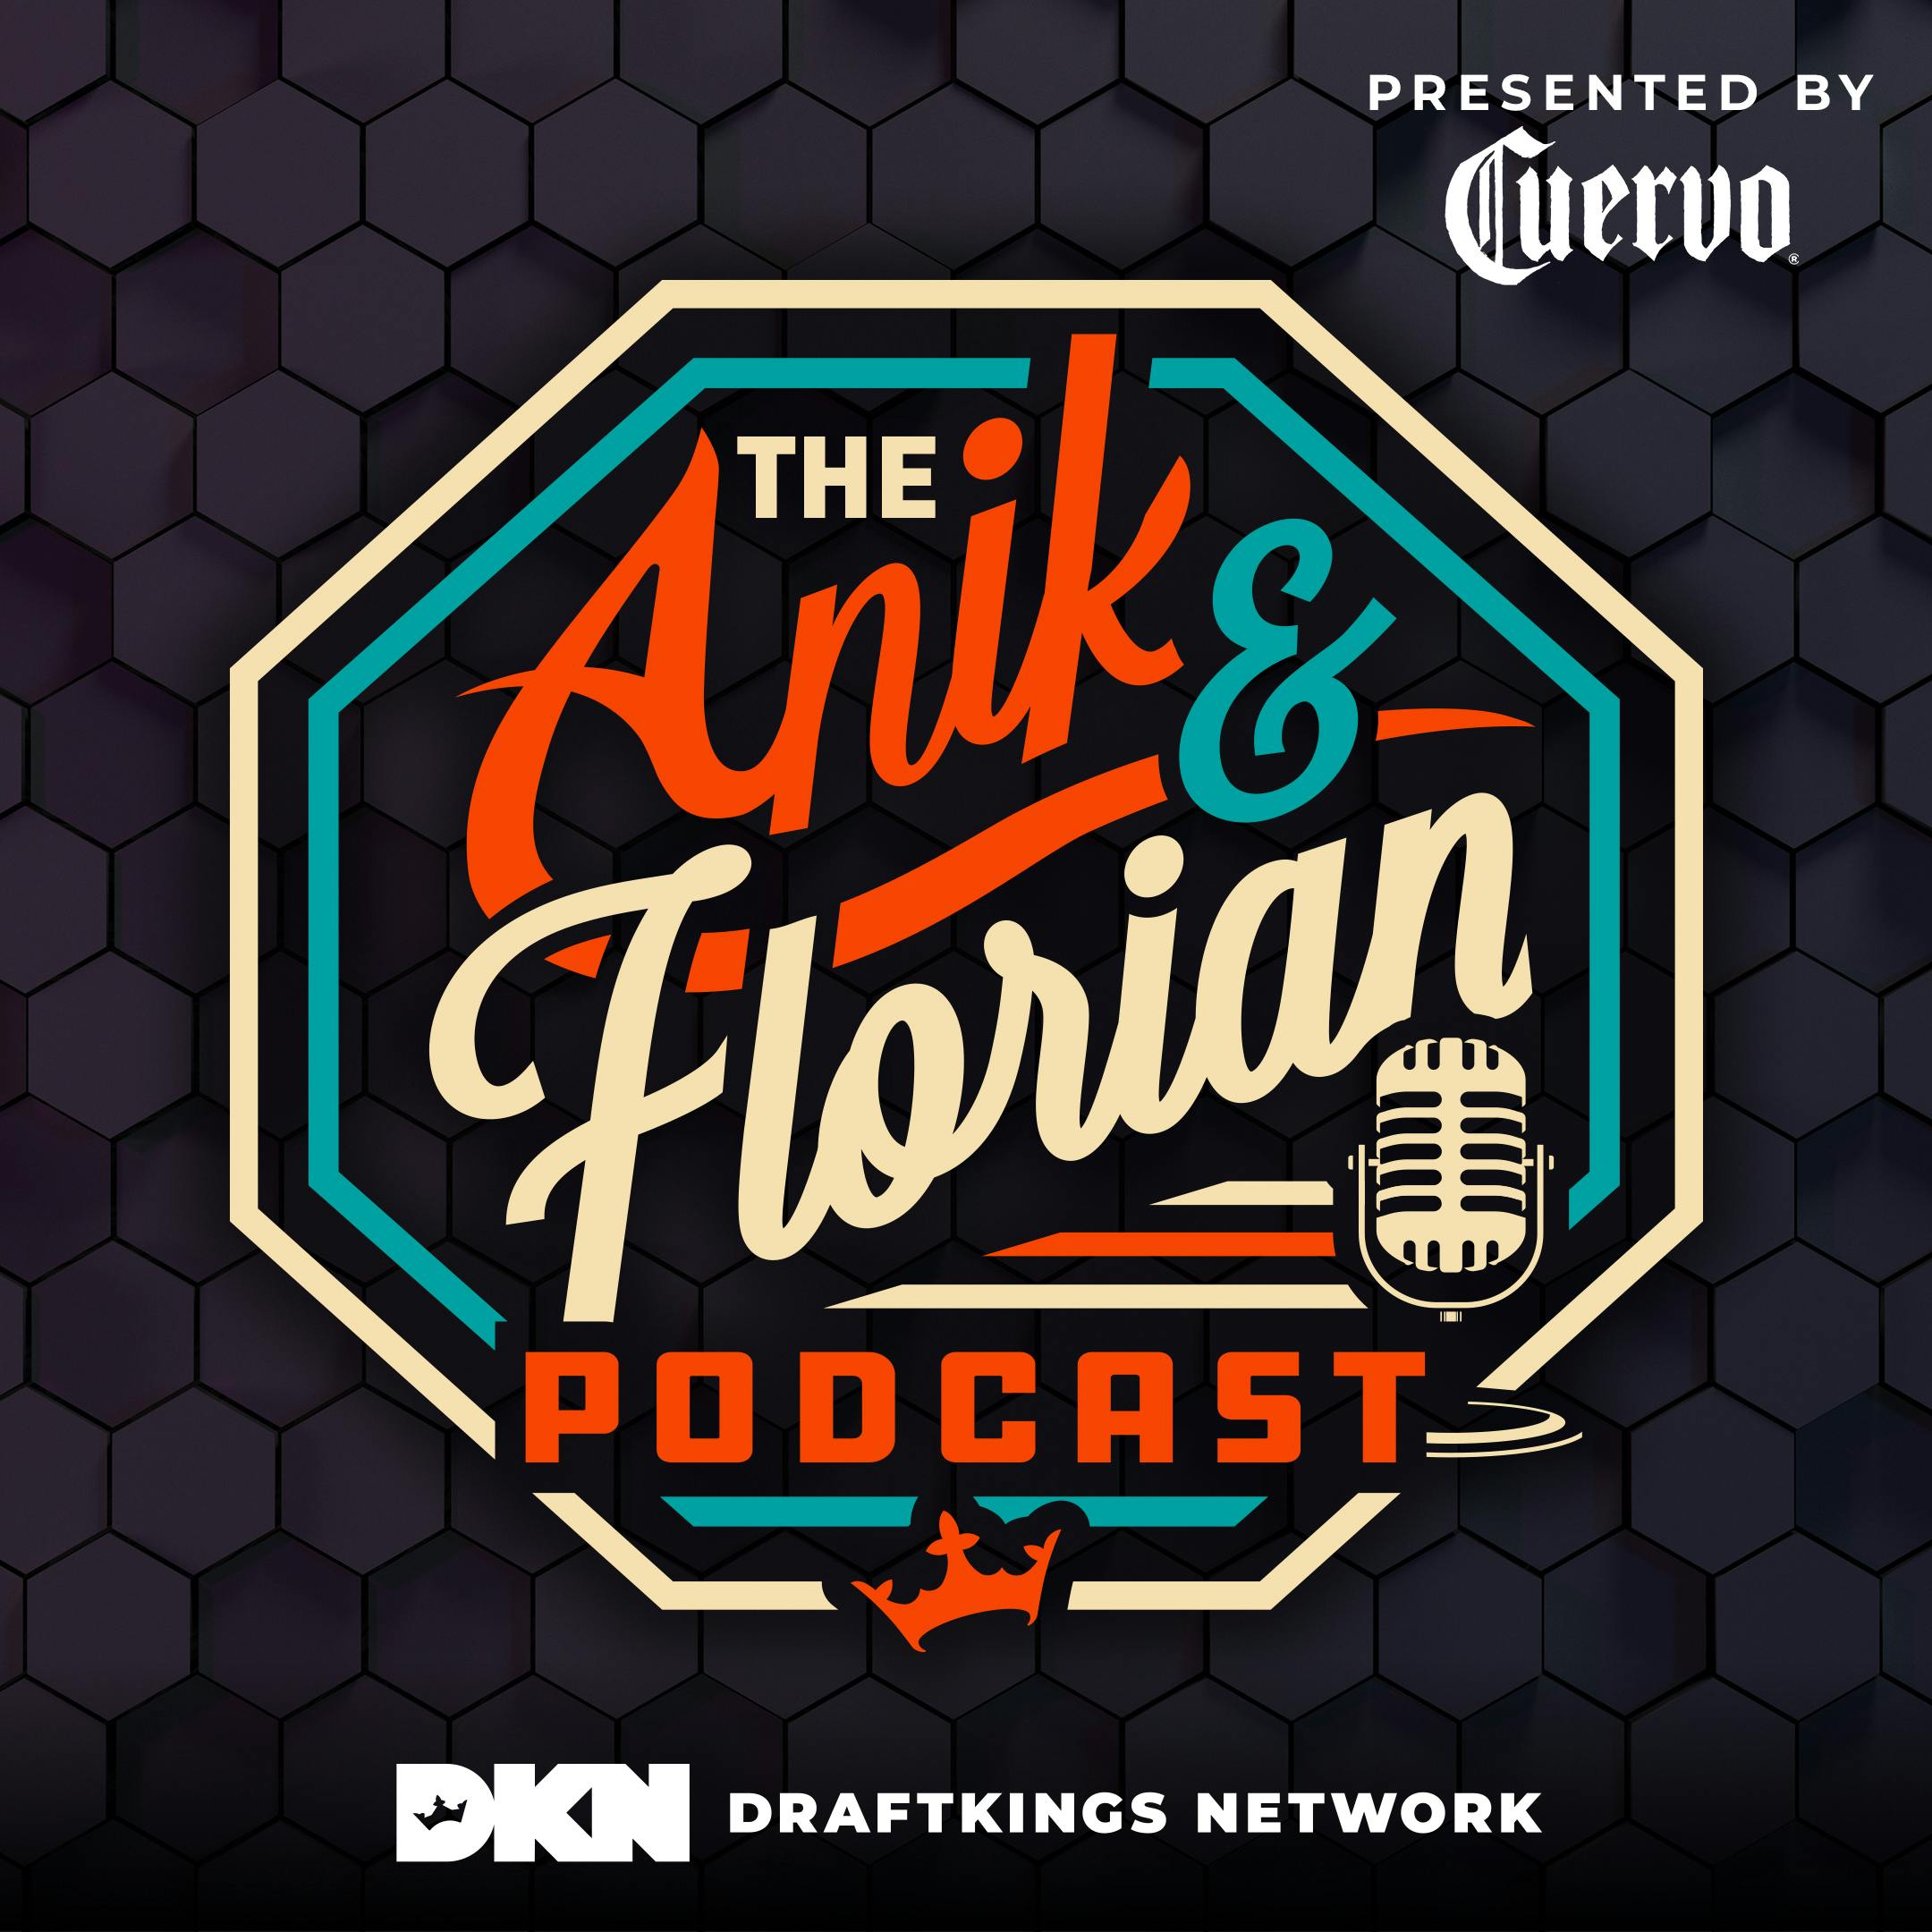 EP. 488: The Anik & Florian State of MMA with Dan Hardy, Joaquin Buckley, and Ray Longo